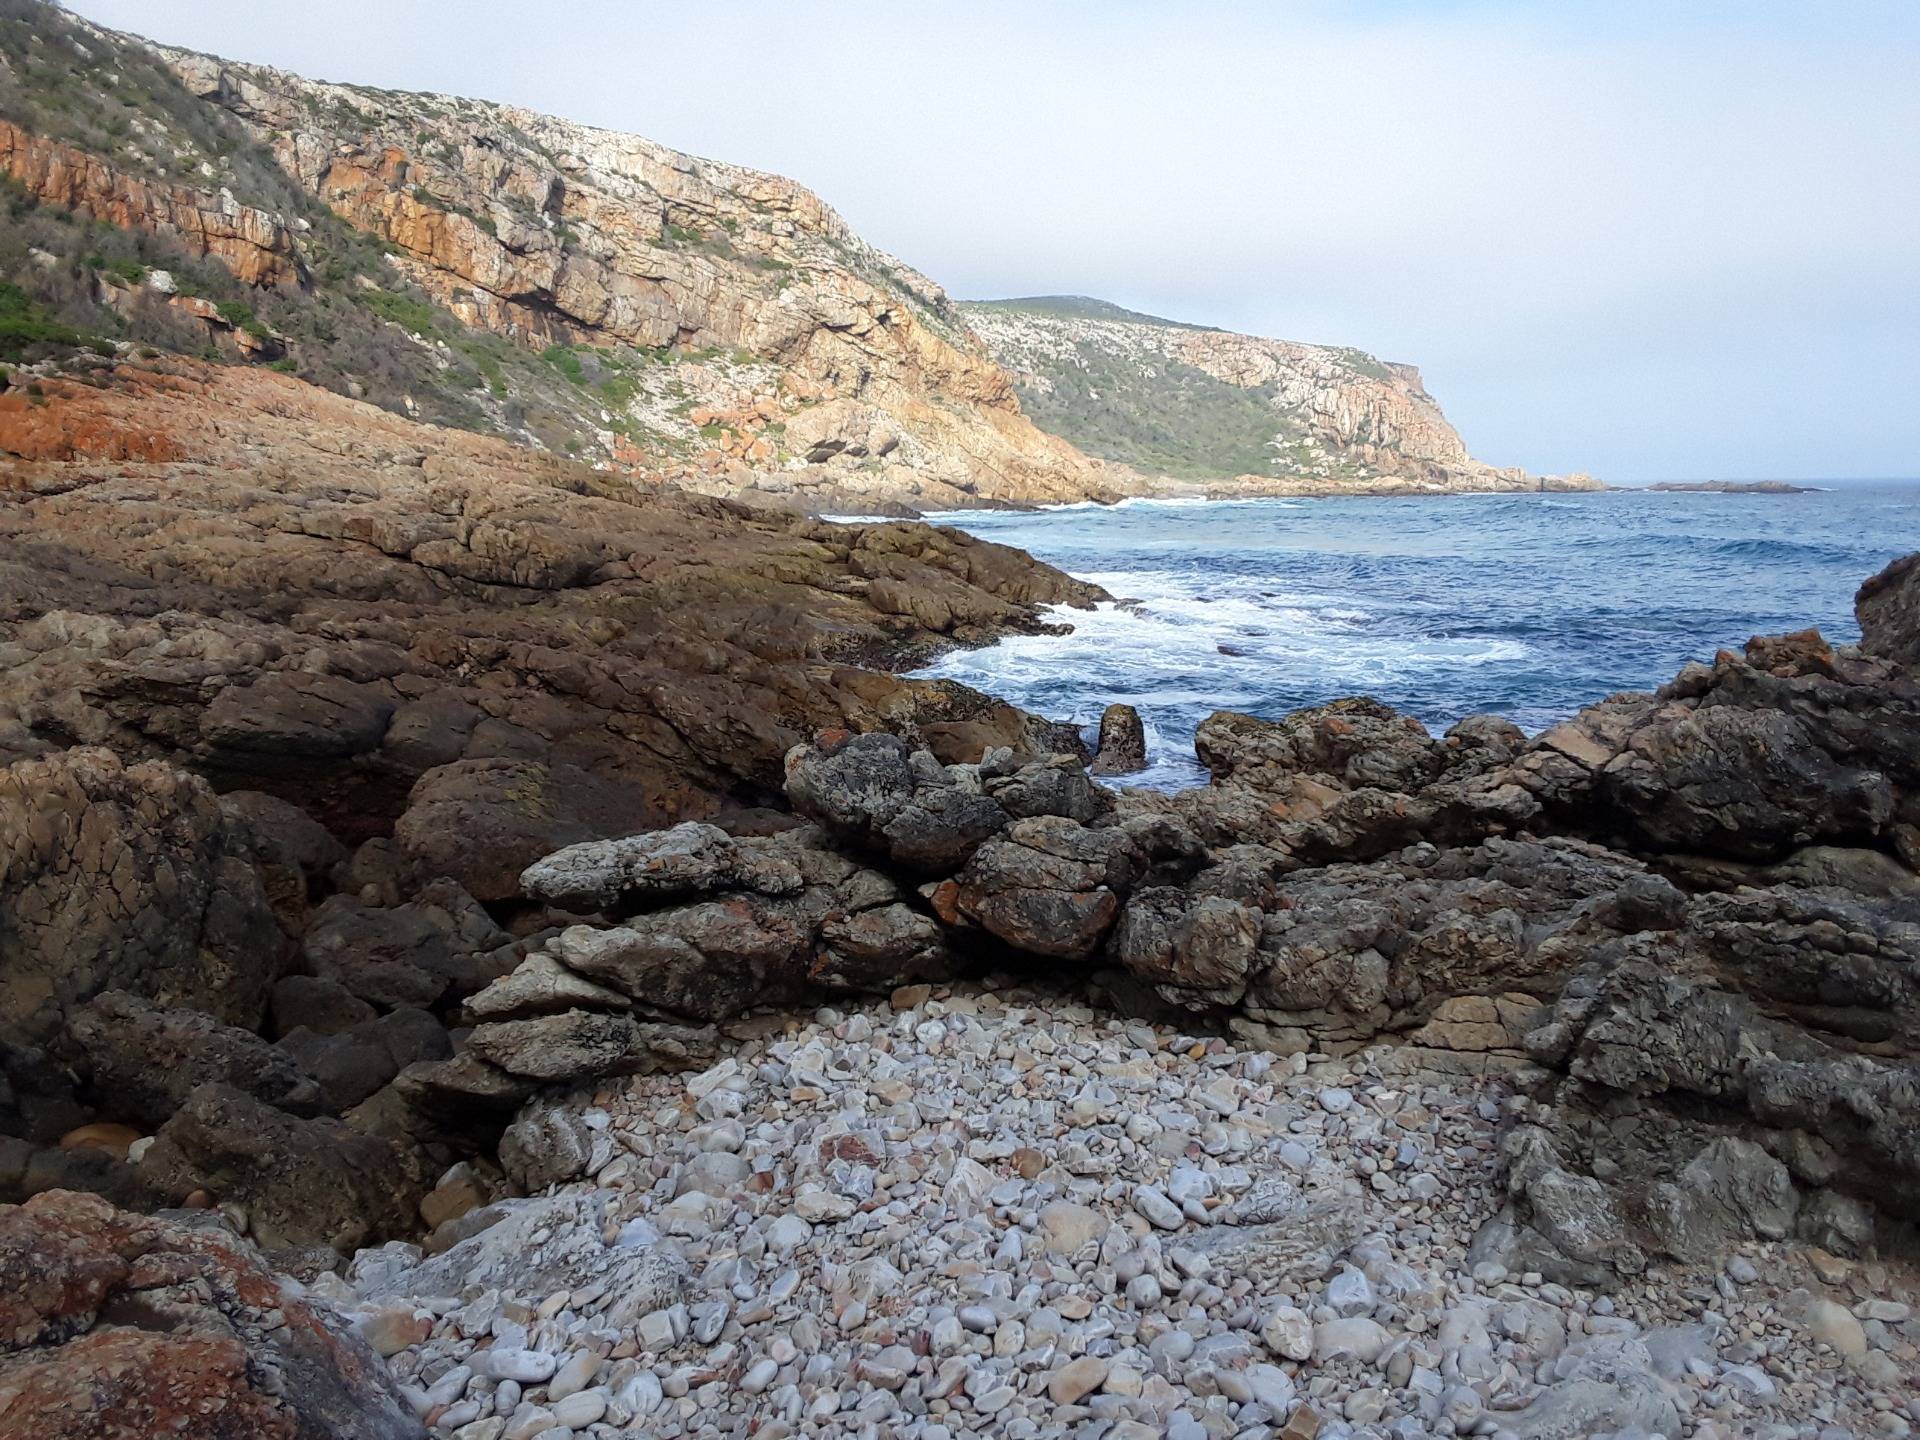 The same rocky beaches that stone age Bushmen walked for thousands of years, until European sailors arrived 